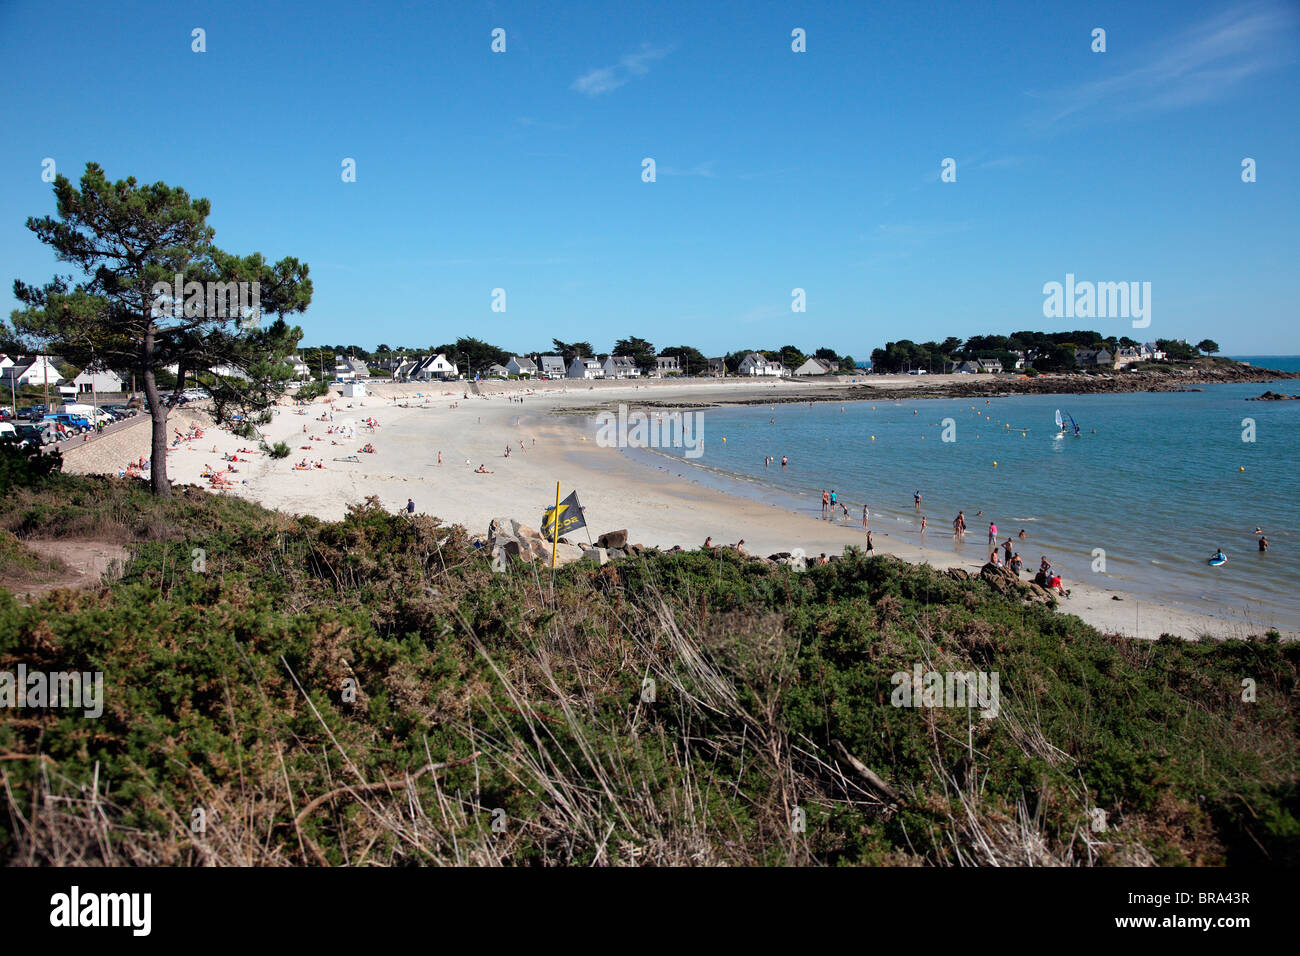 Carnac Plage, Carnac, Brittany, France Stock Photo